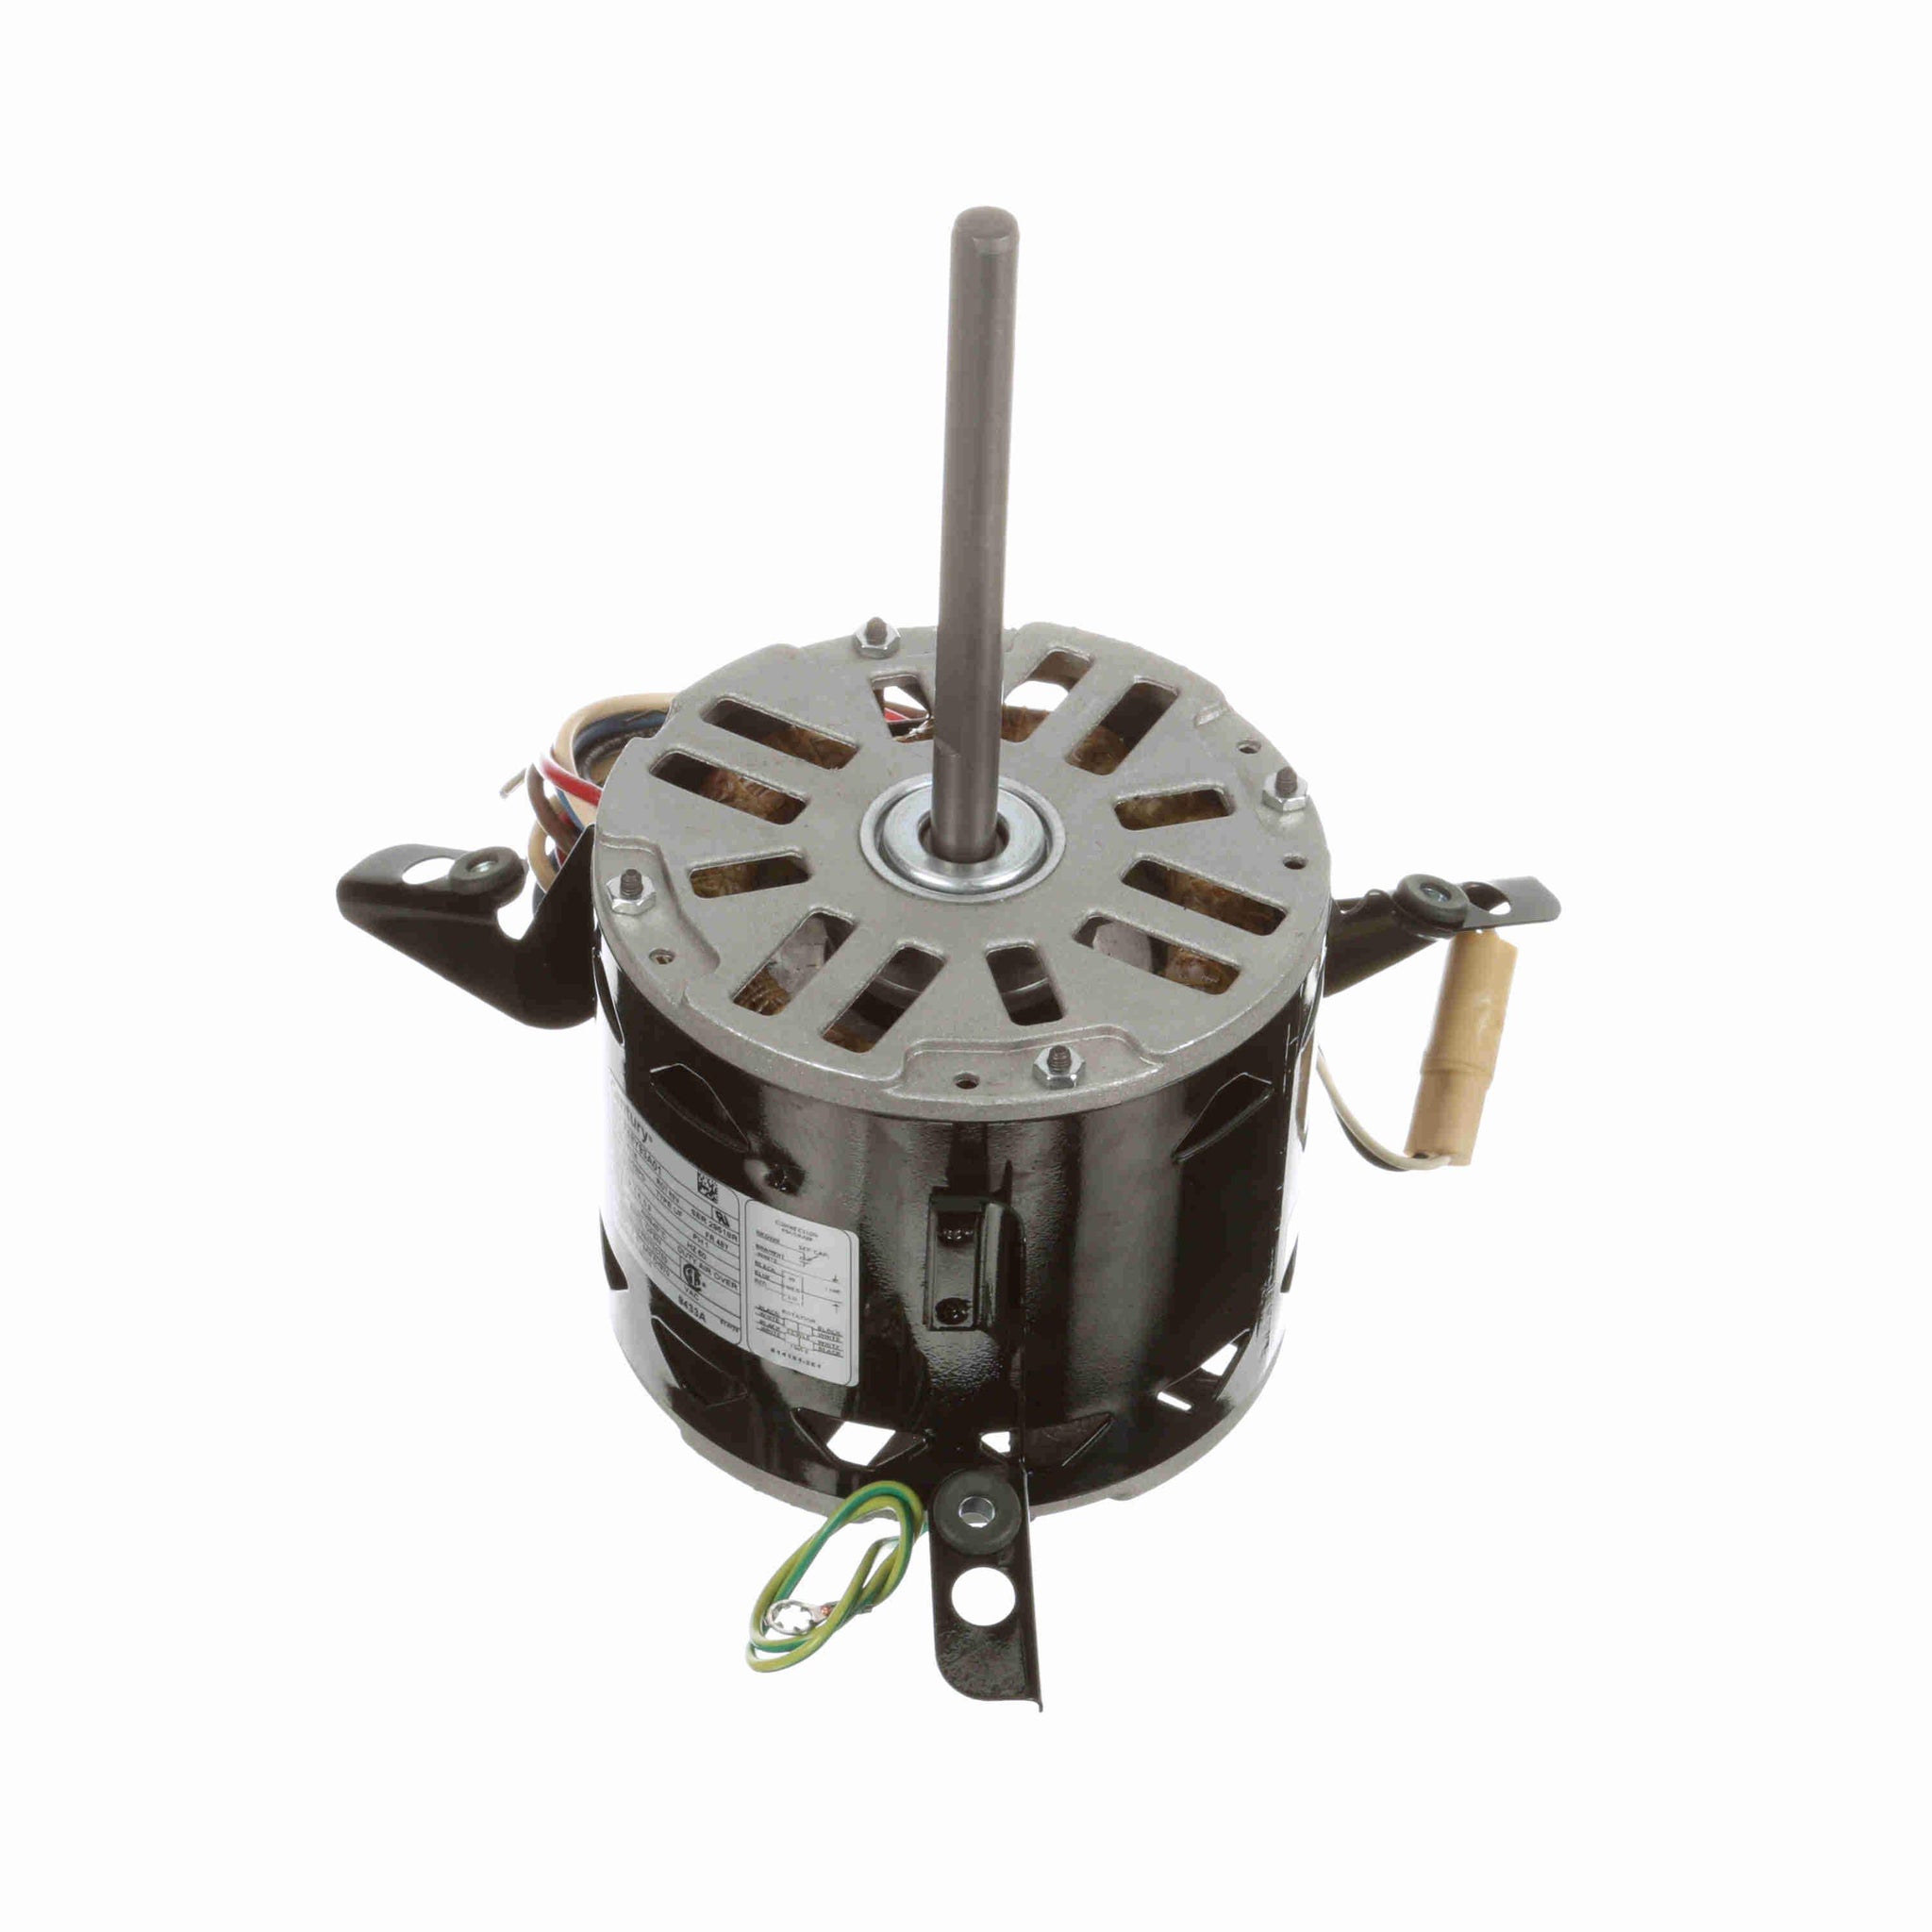 9433A -  1/3-44287-1/6 HP Fan Coil / Room Air Conditioner Motor, 1075 RPM, 3 Speed, 277 Volts, 48 Frame, OAO - Hardware & Moreee